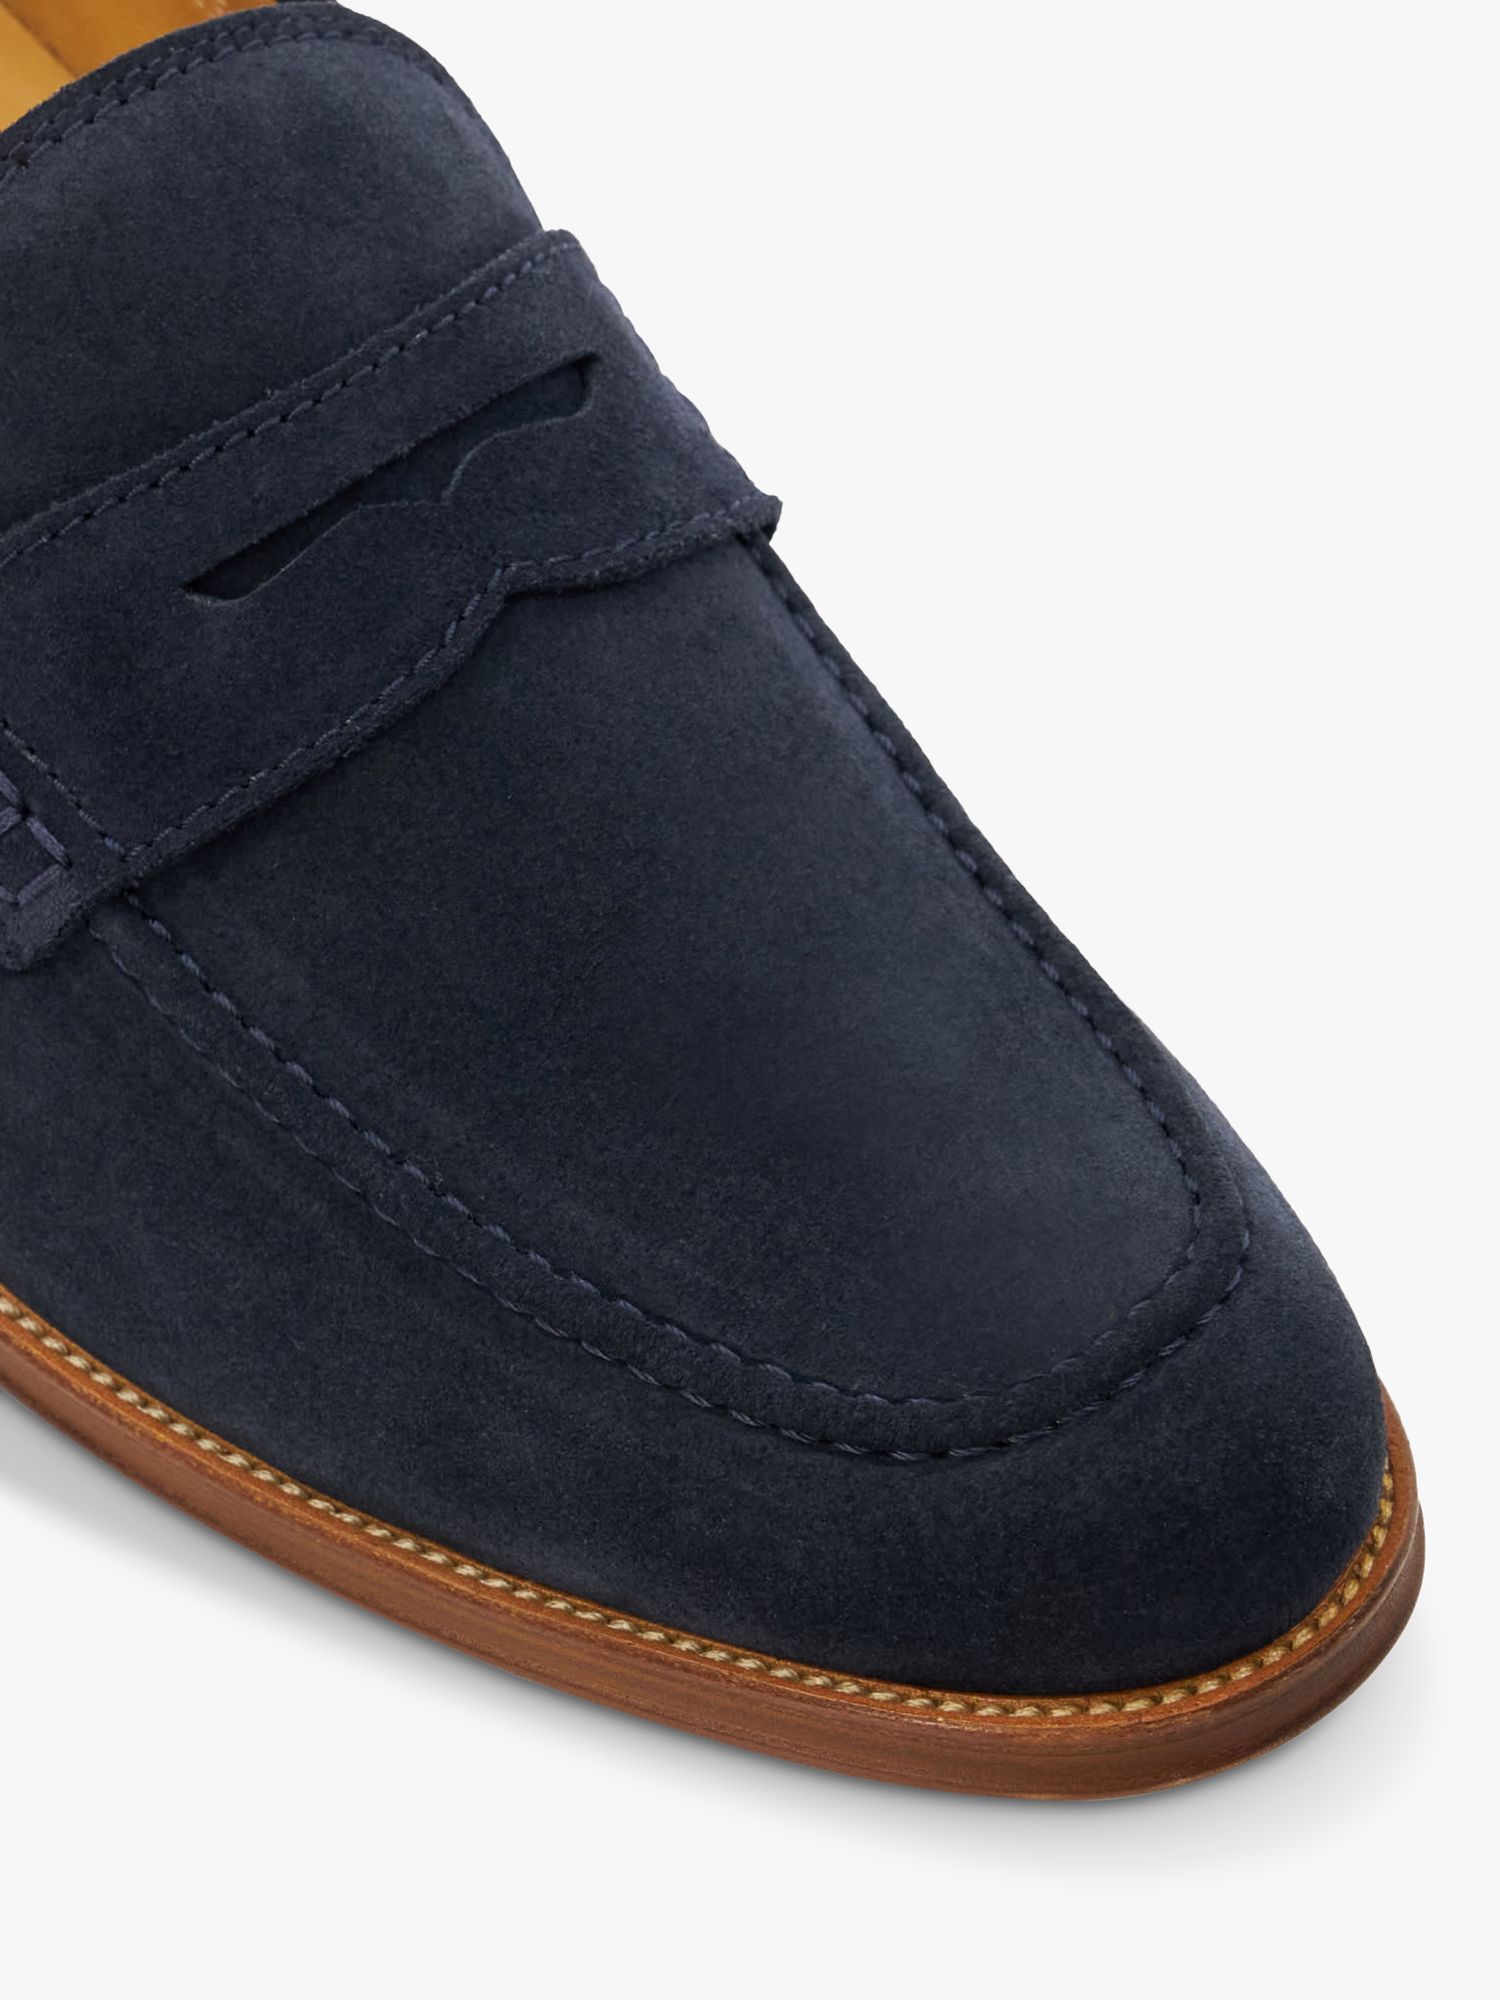 Buy Dune Sulli Natural Sole Penny Loafers, Navy Online at johnlewis.com